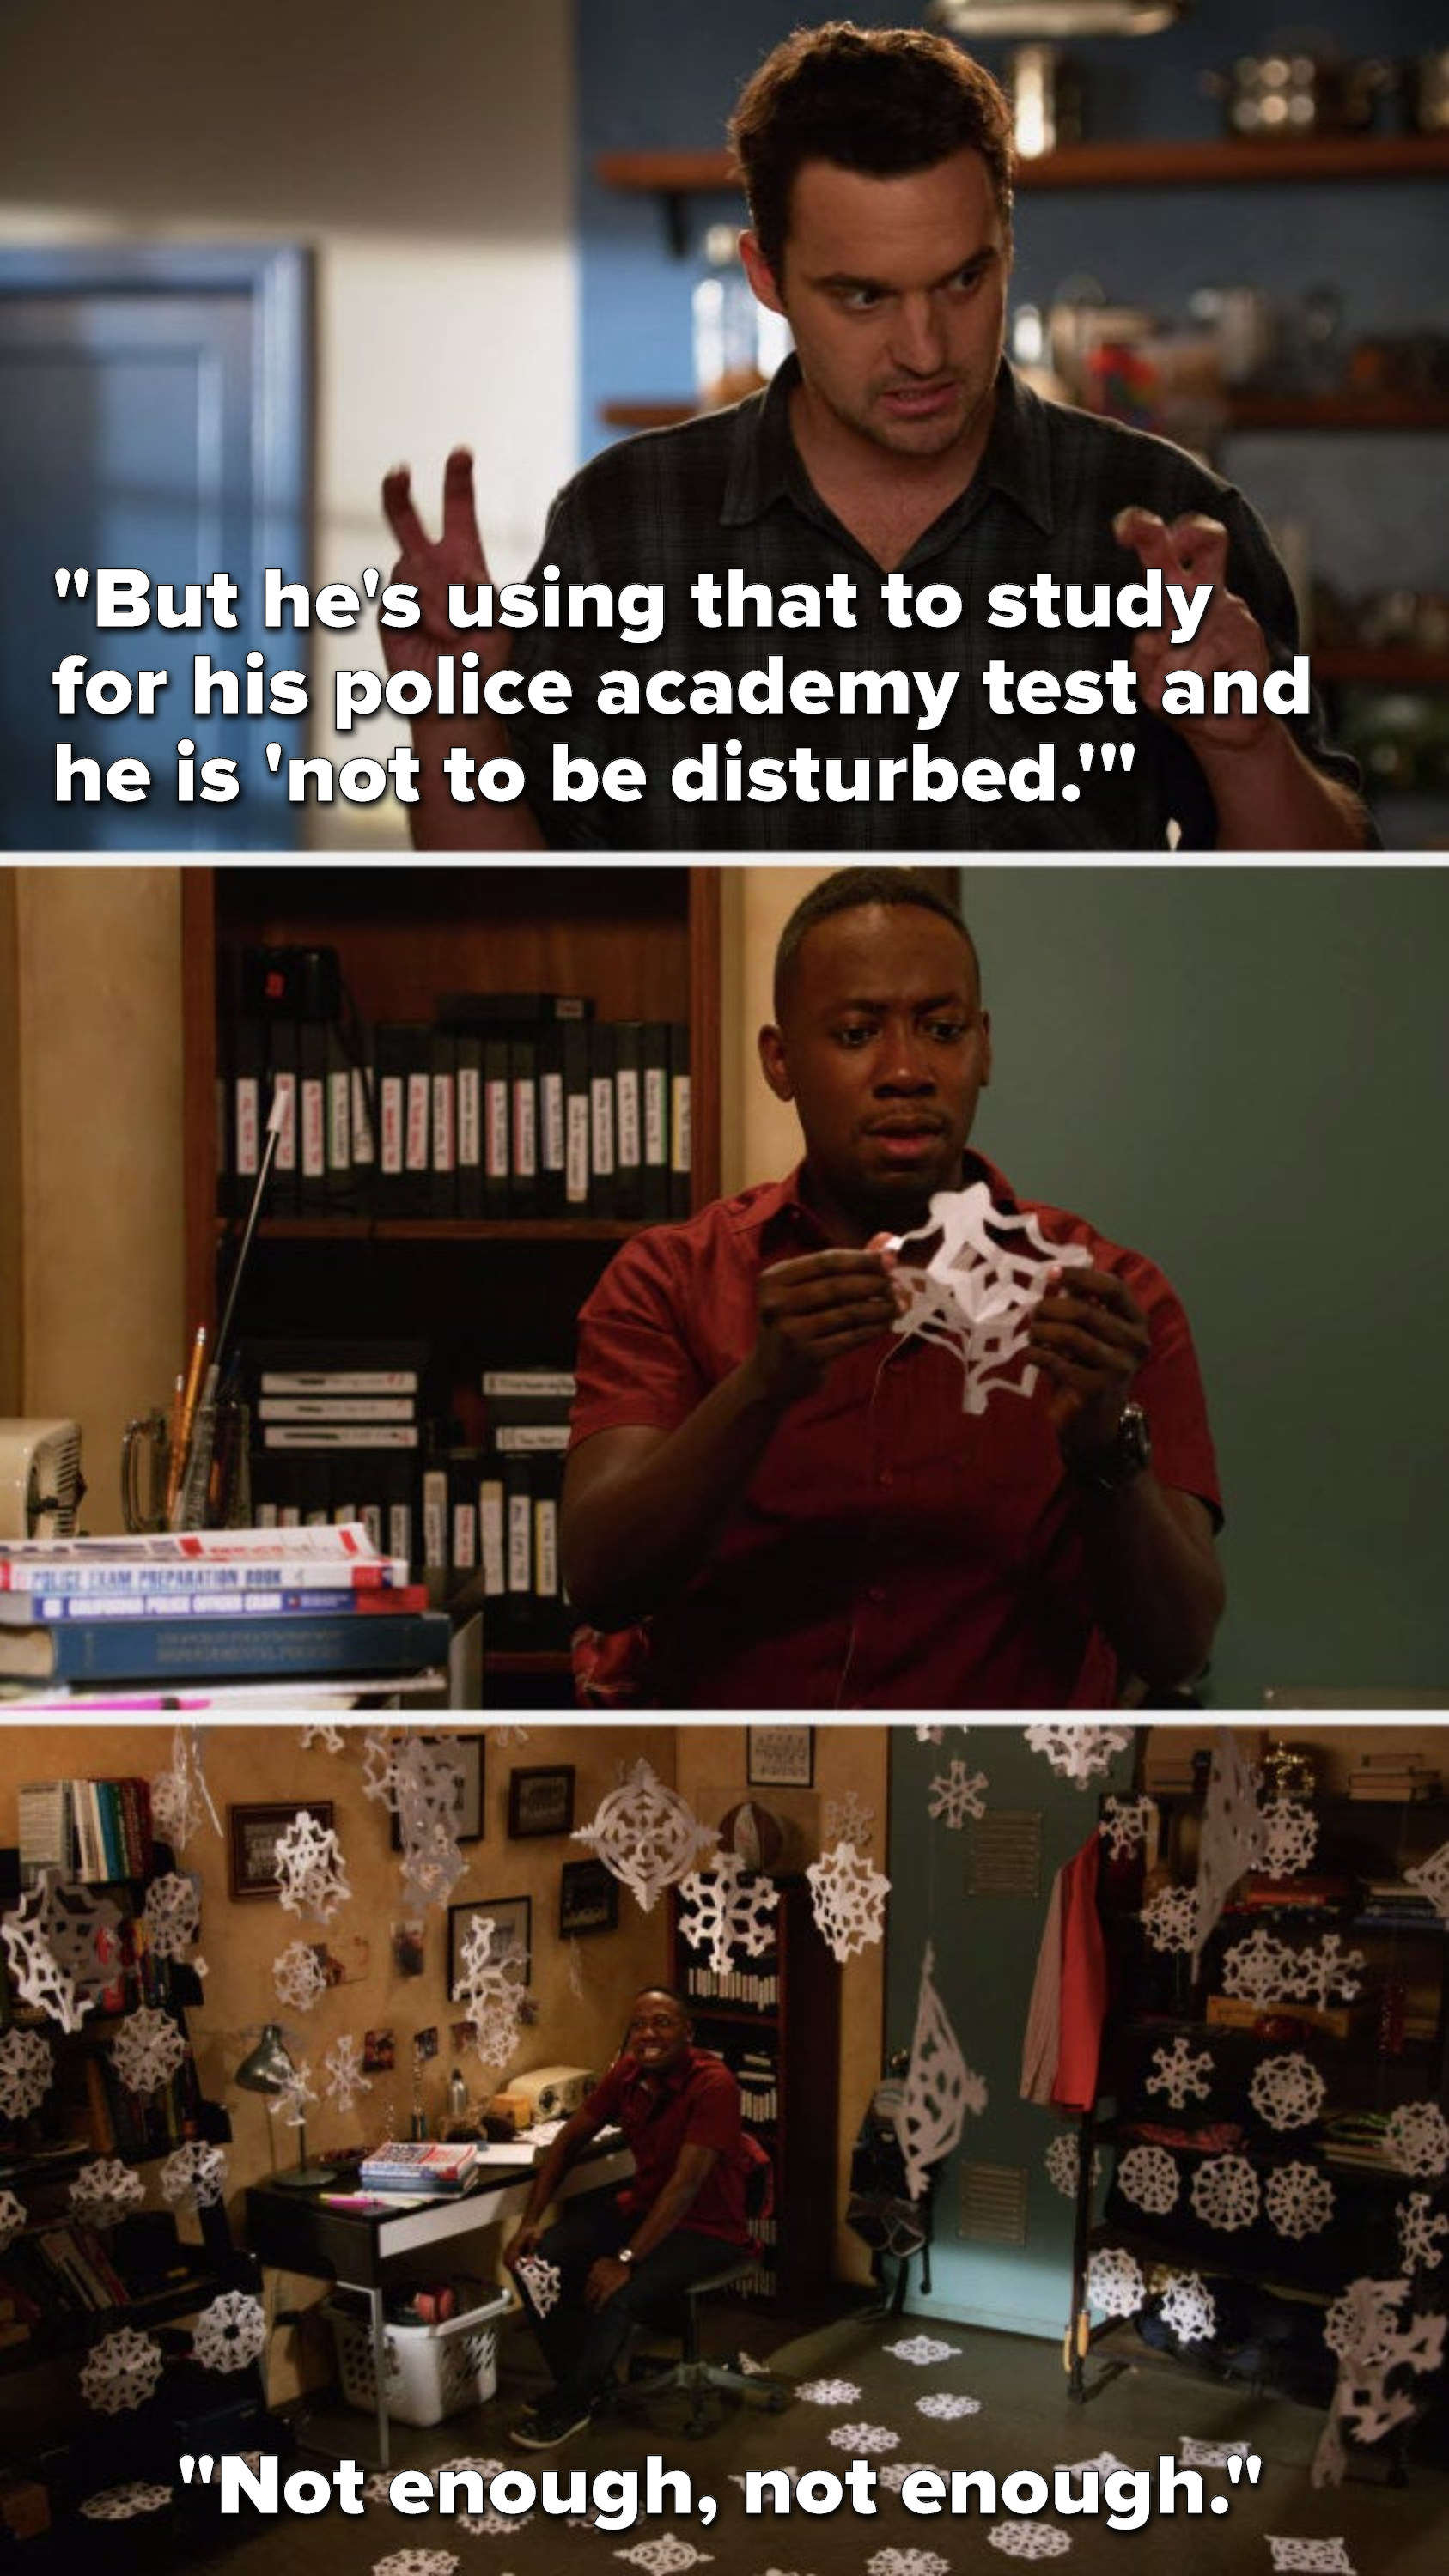 Nick says, &quot;But he&#x27;s using that to study for his police academy test and he is &#x27;not to be disturbed,&quot; and we see Winston making a paper snowflake in his room, then we see that his room is covered in paper snowflakes and he says, &quot;not enough, not enough&quot;